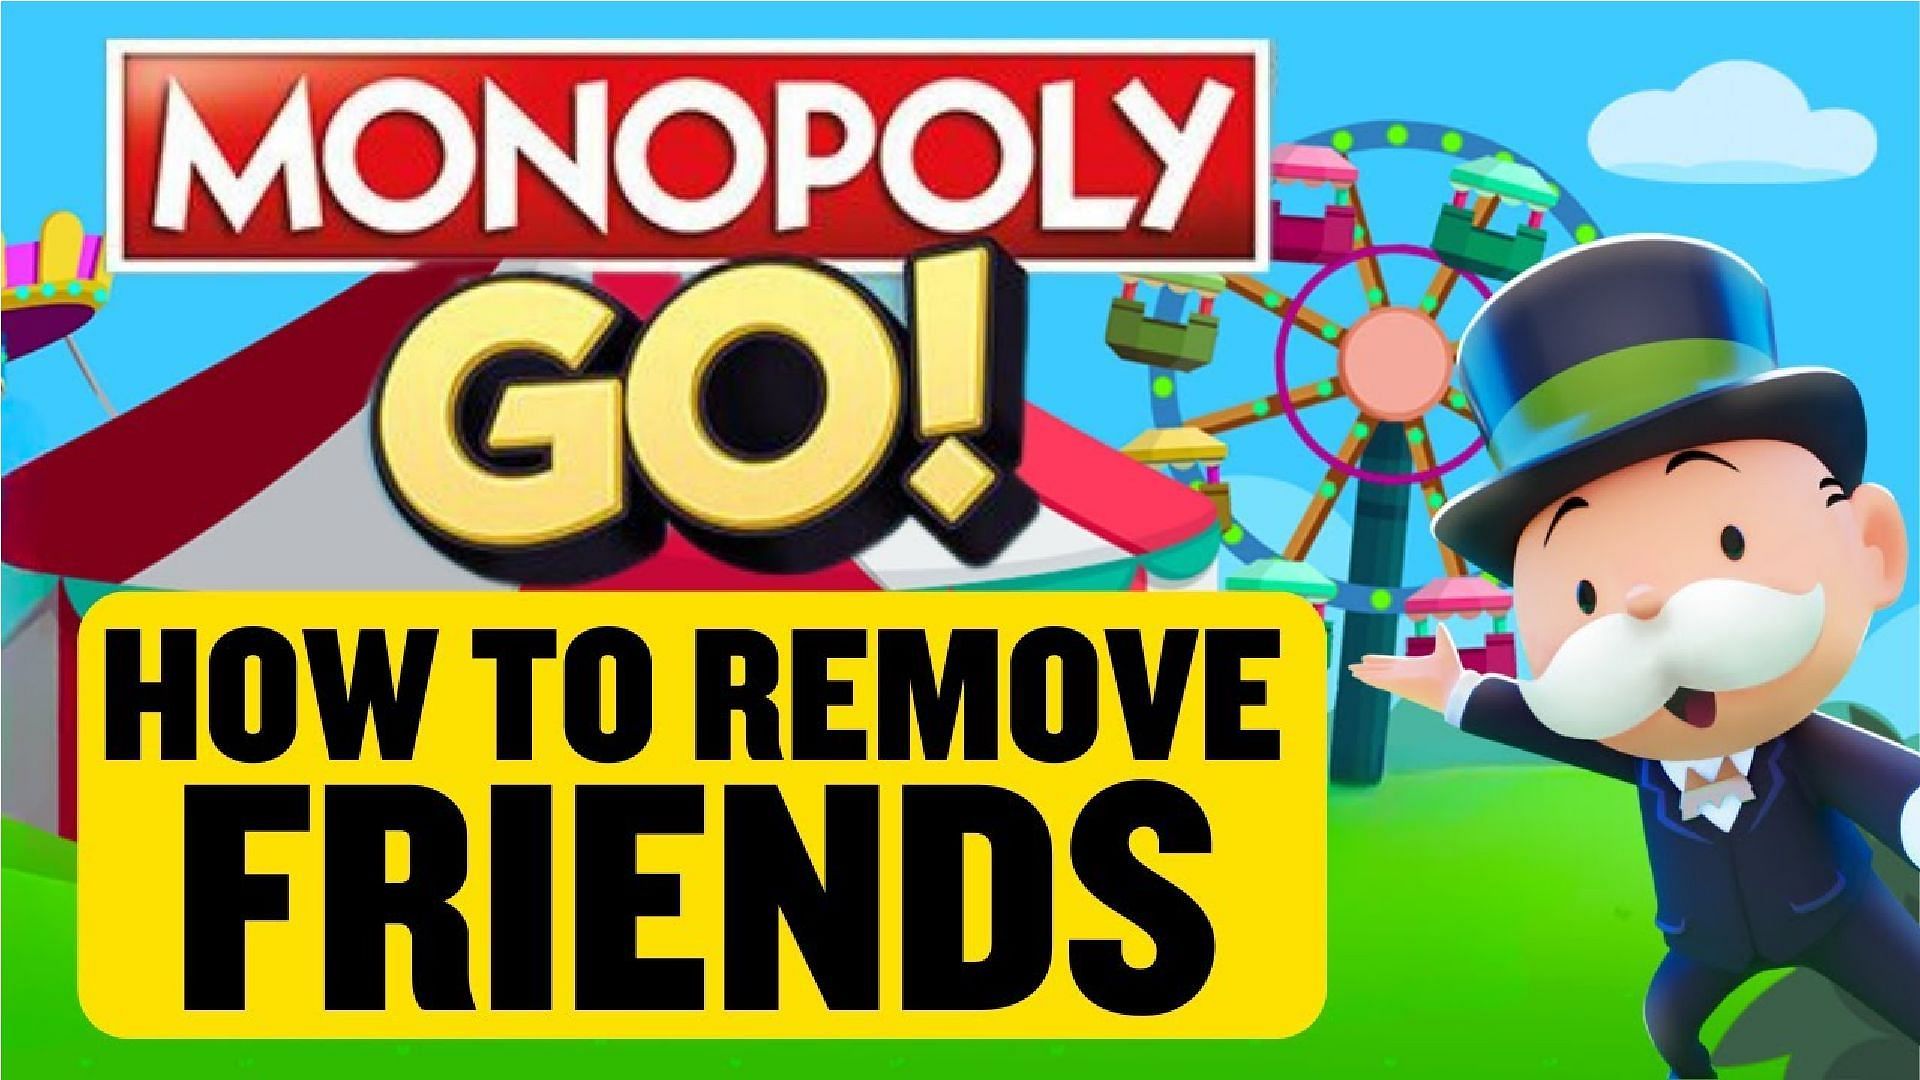 friends on monopoly go